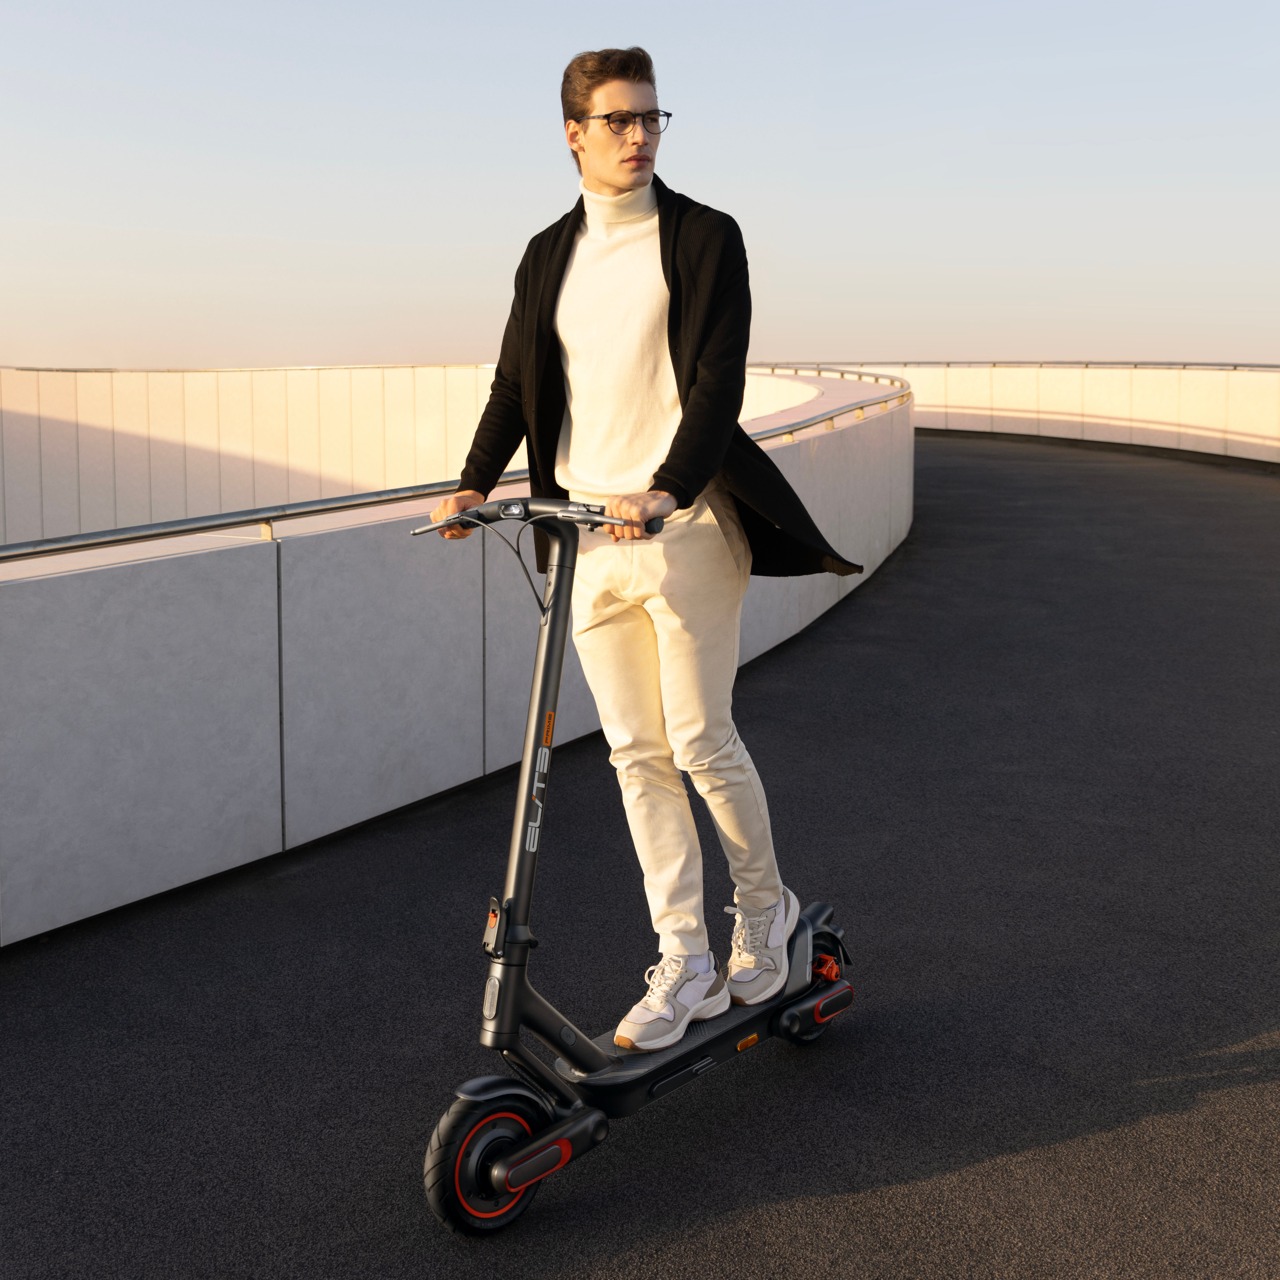 This foldable e-scooter comes with a max range of 37 miles, making